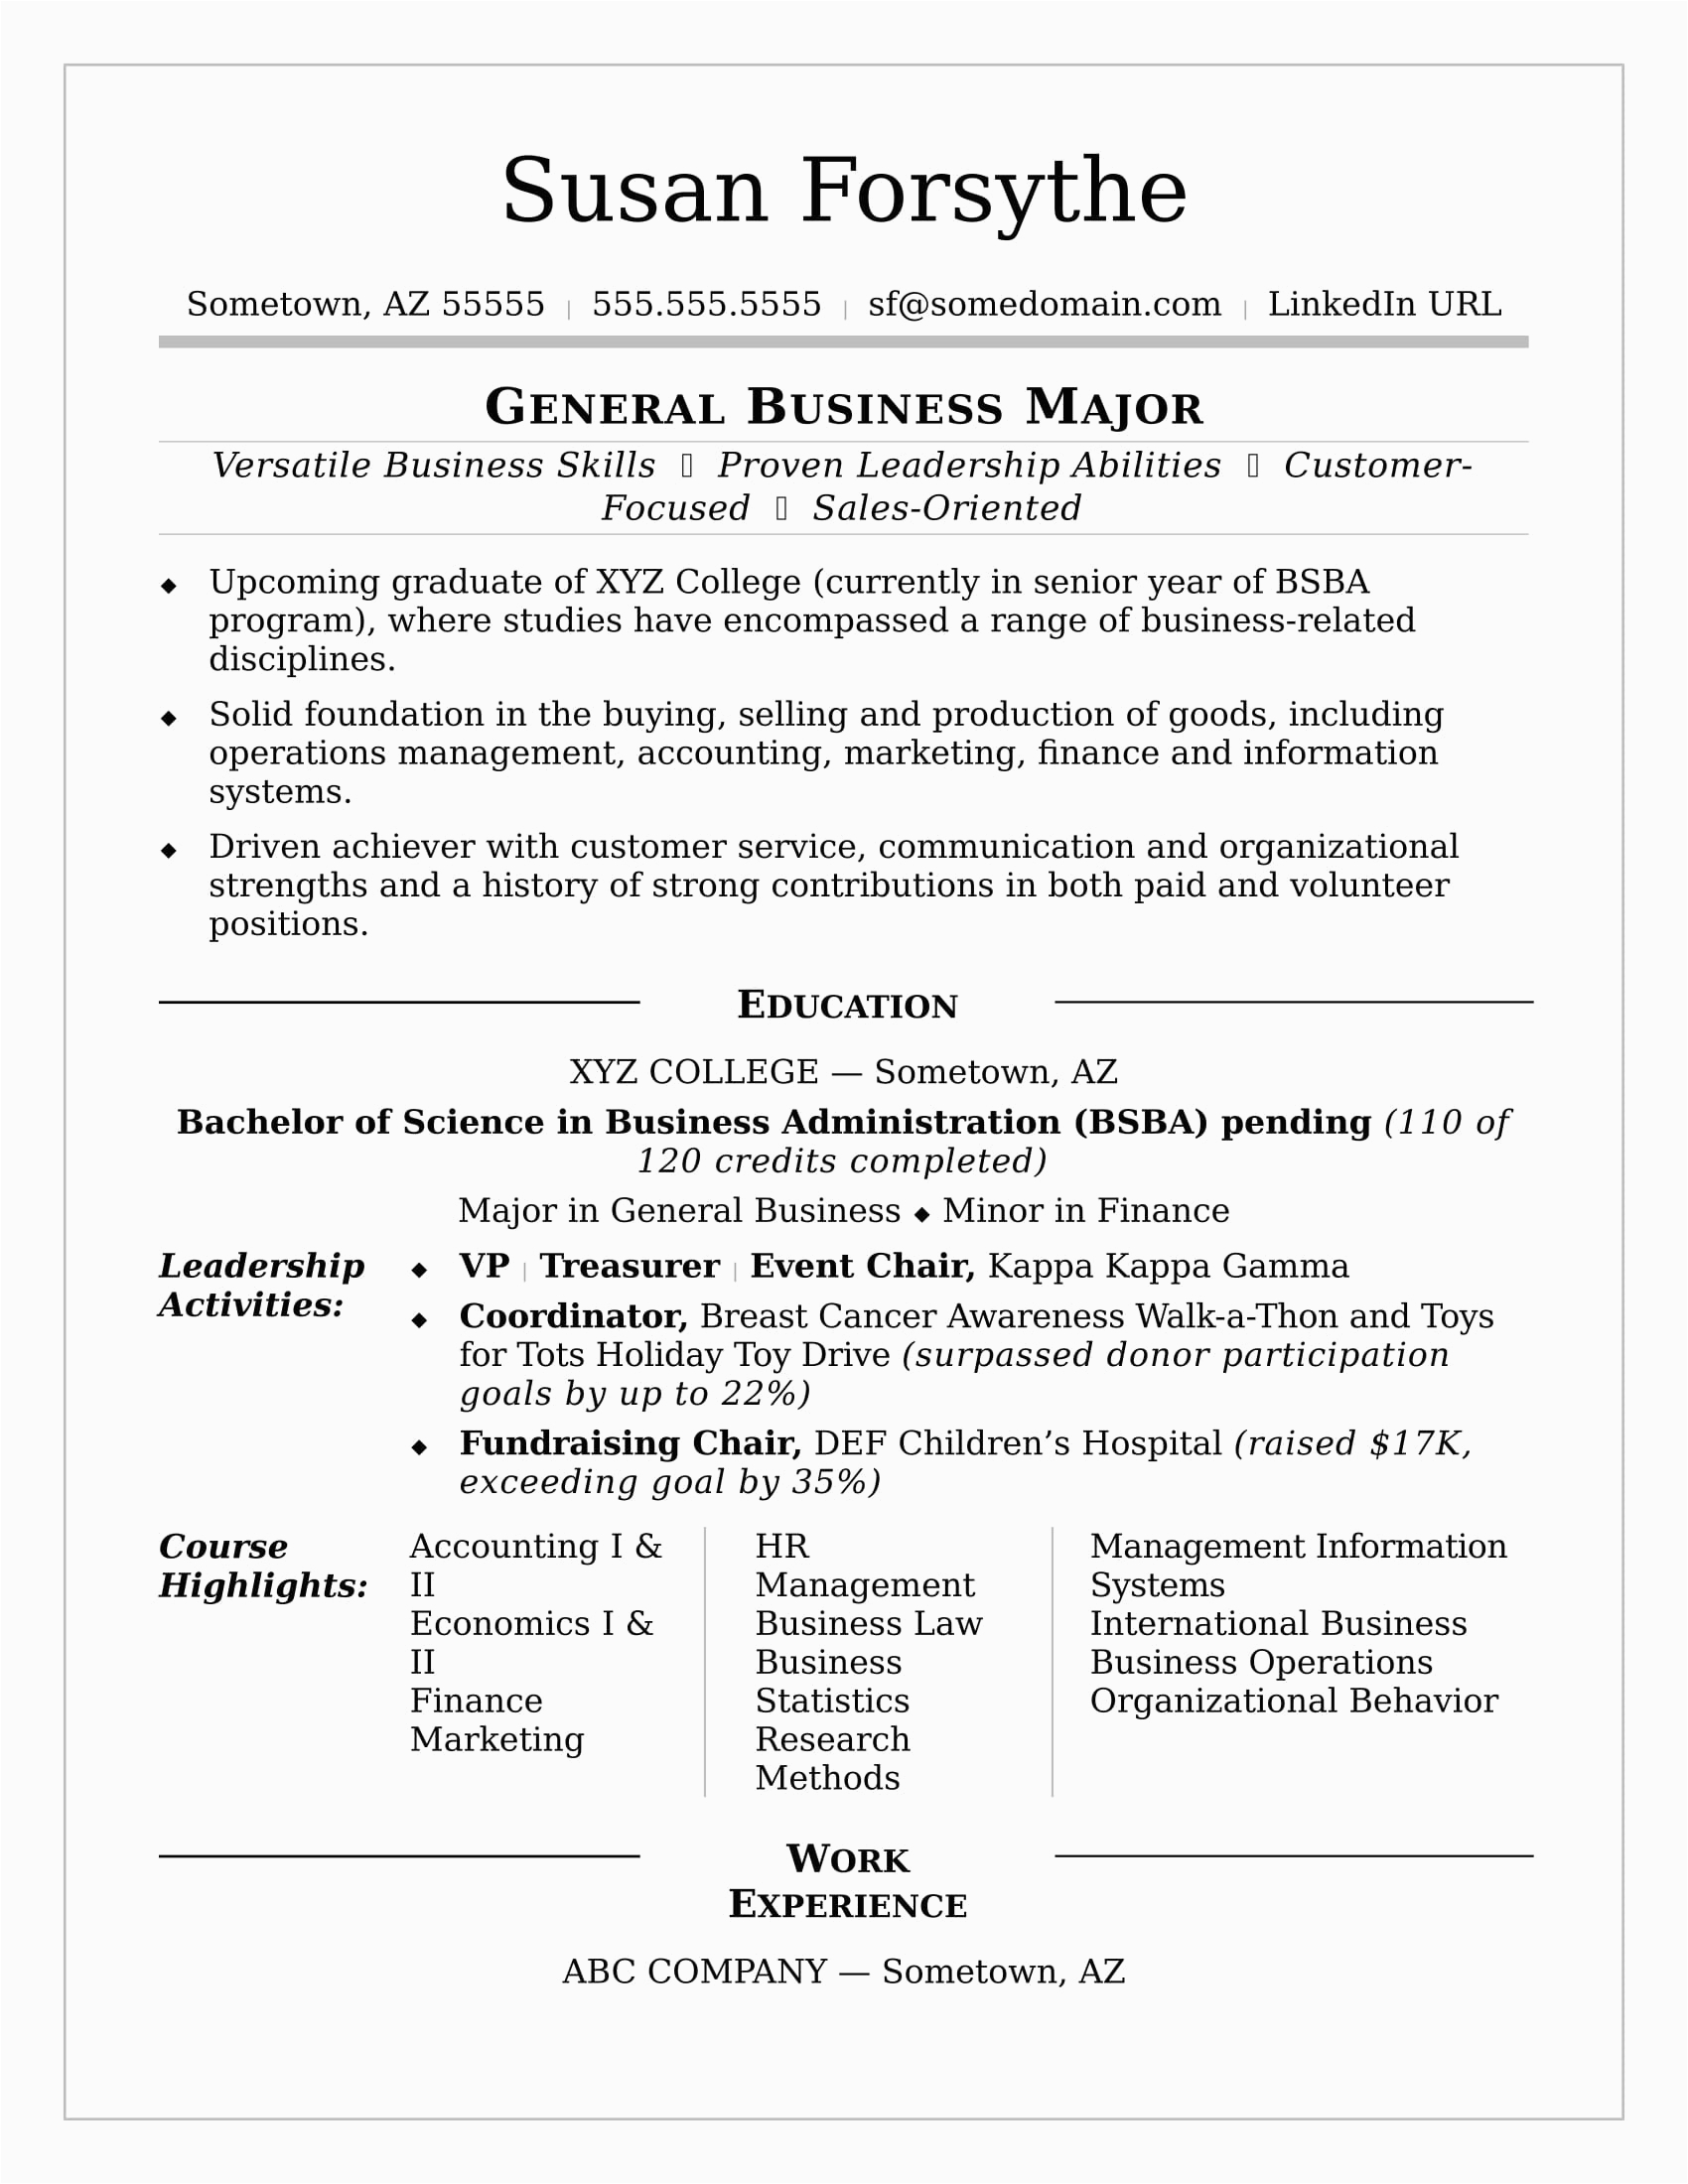 Sample Resume Templates for College Students College Student Resume